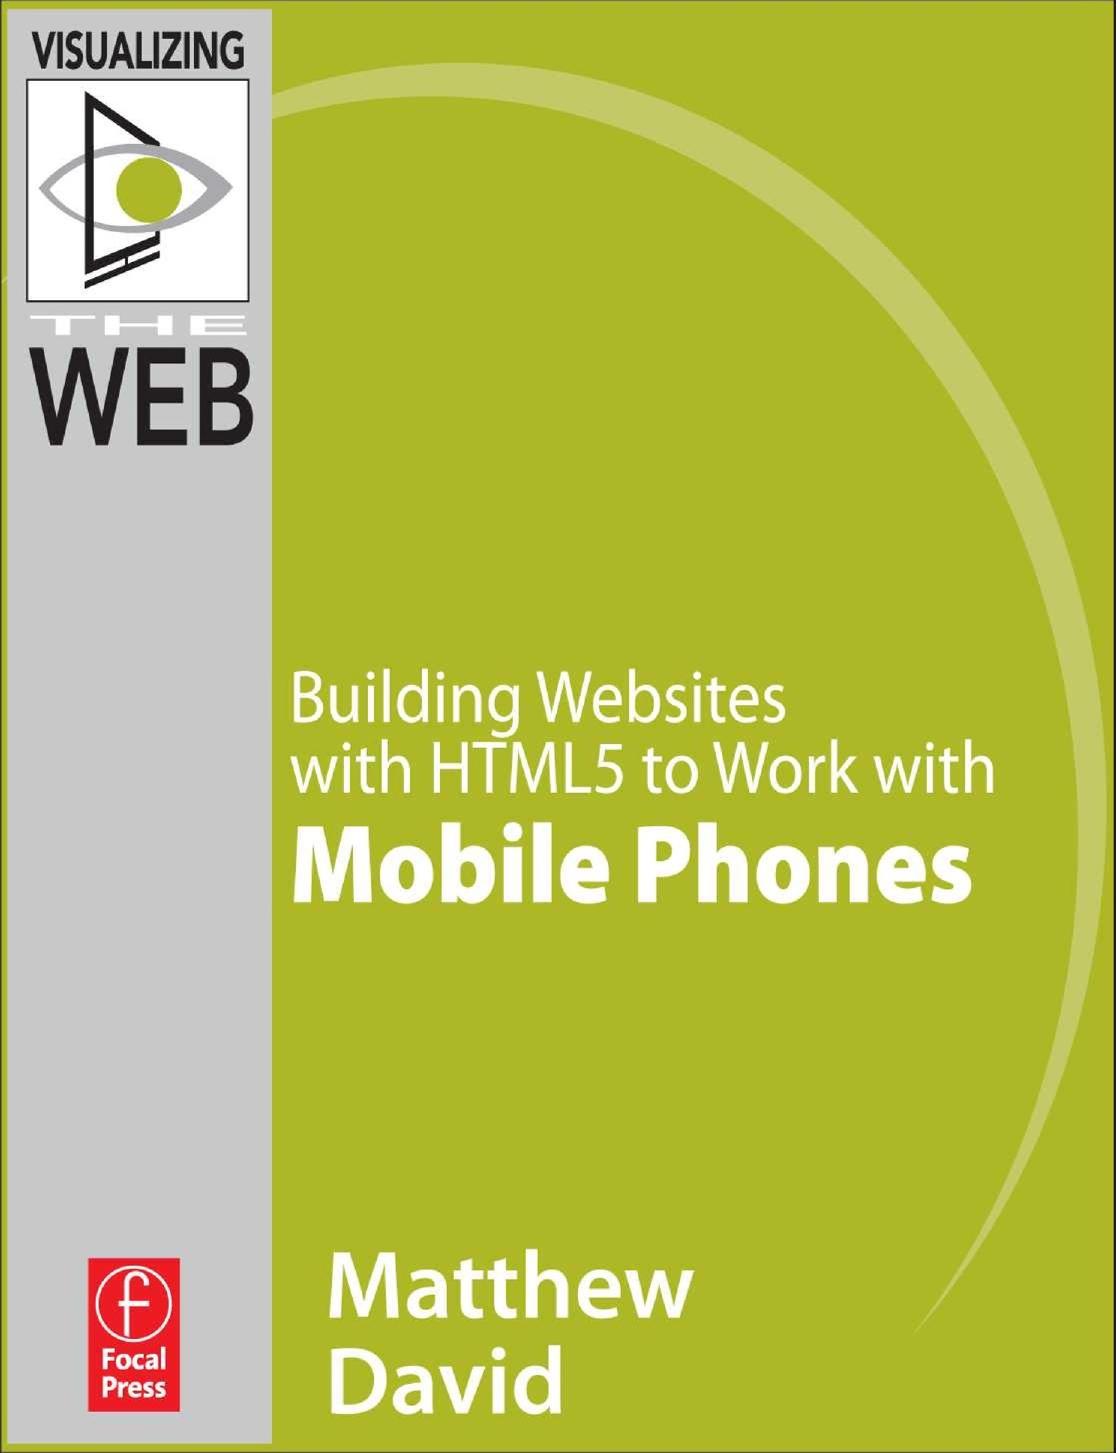 bb-Building Websites with HTML5 to Work with Mobile by Matthew David